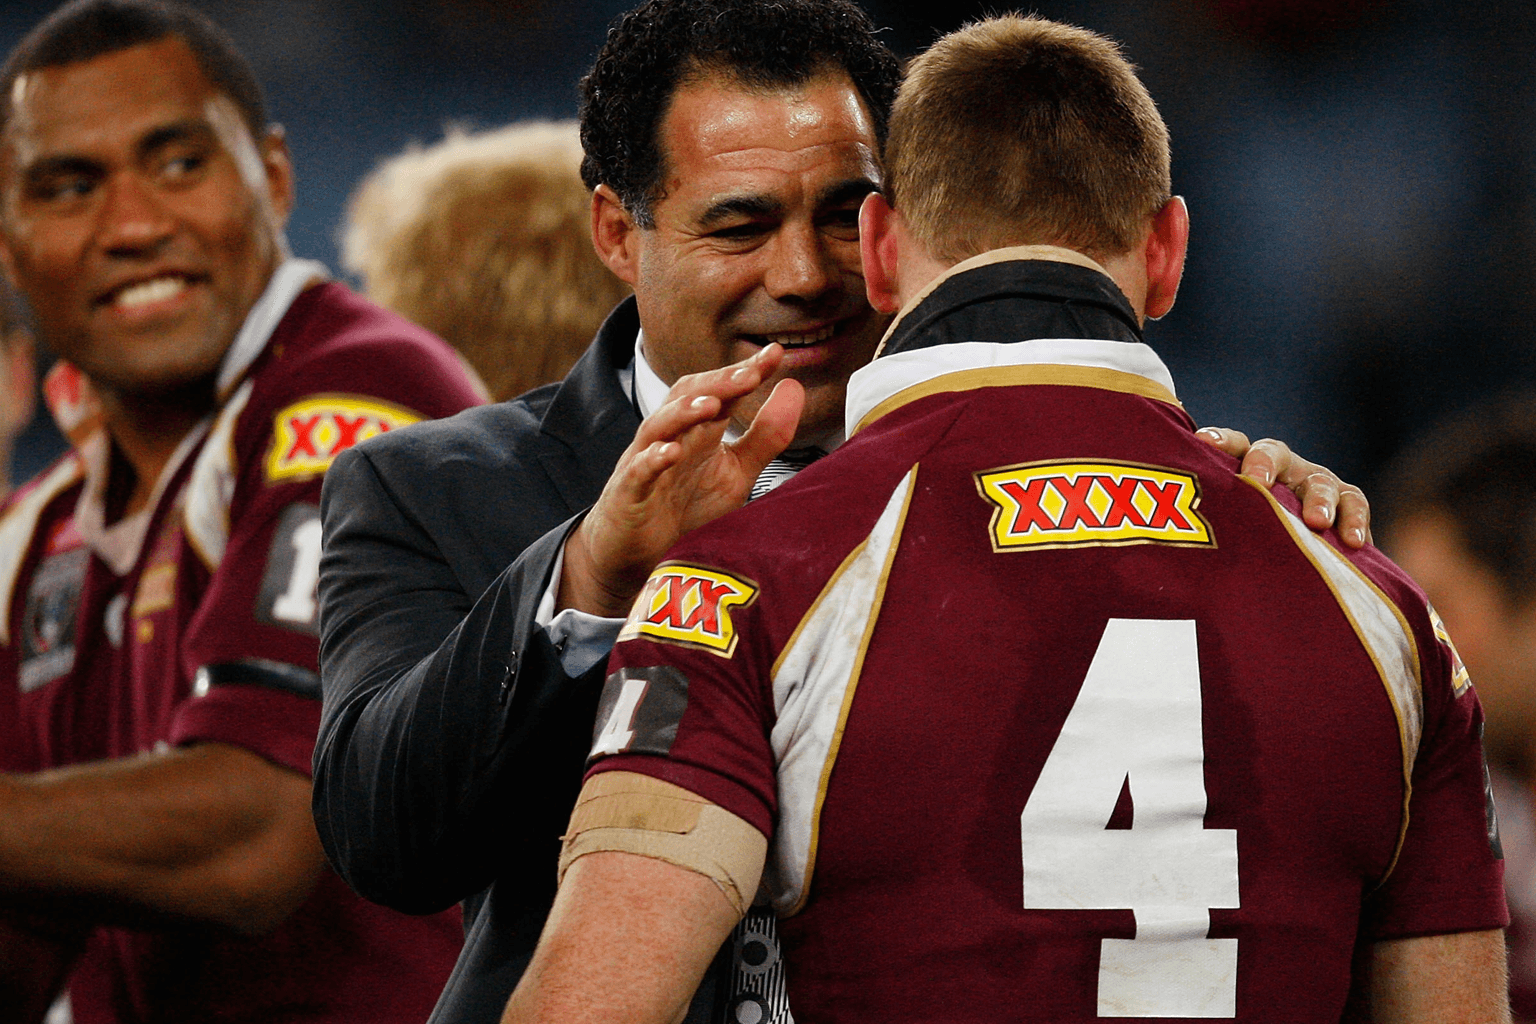 Queensland rugby league coach Mal Meninga congratulates a player wearing the number 4 jersey after a match.